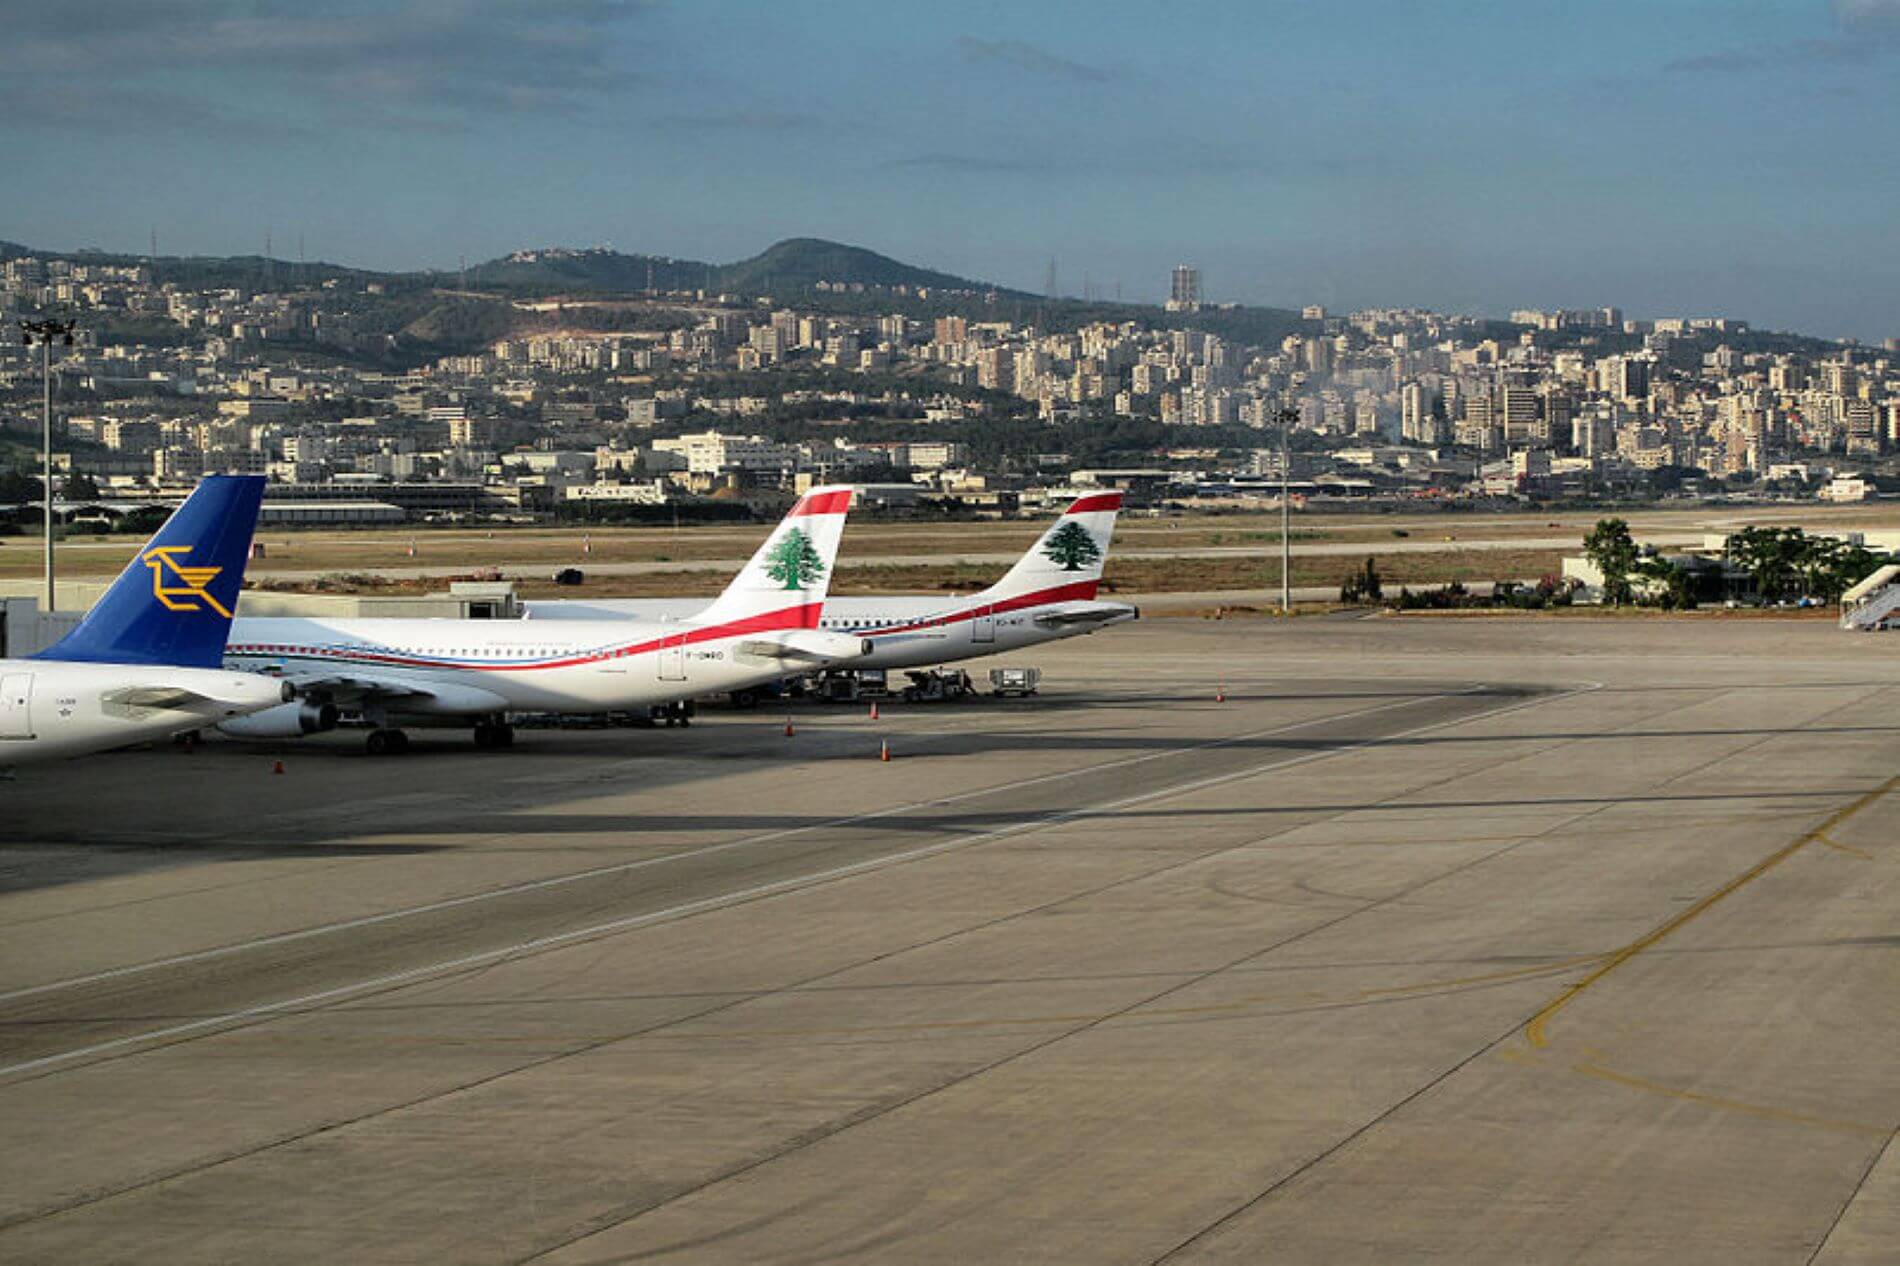 Despite damages, Beirut airport continues operating normally